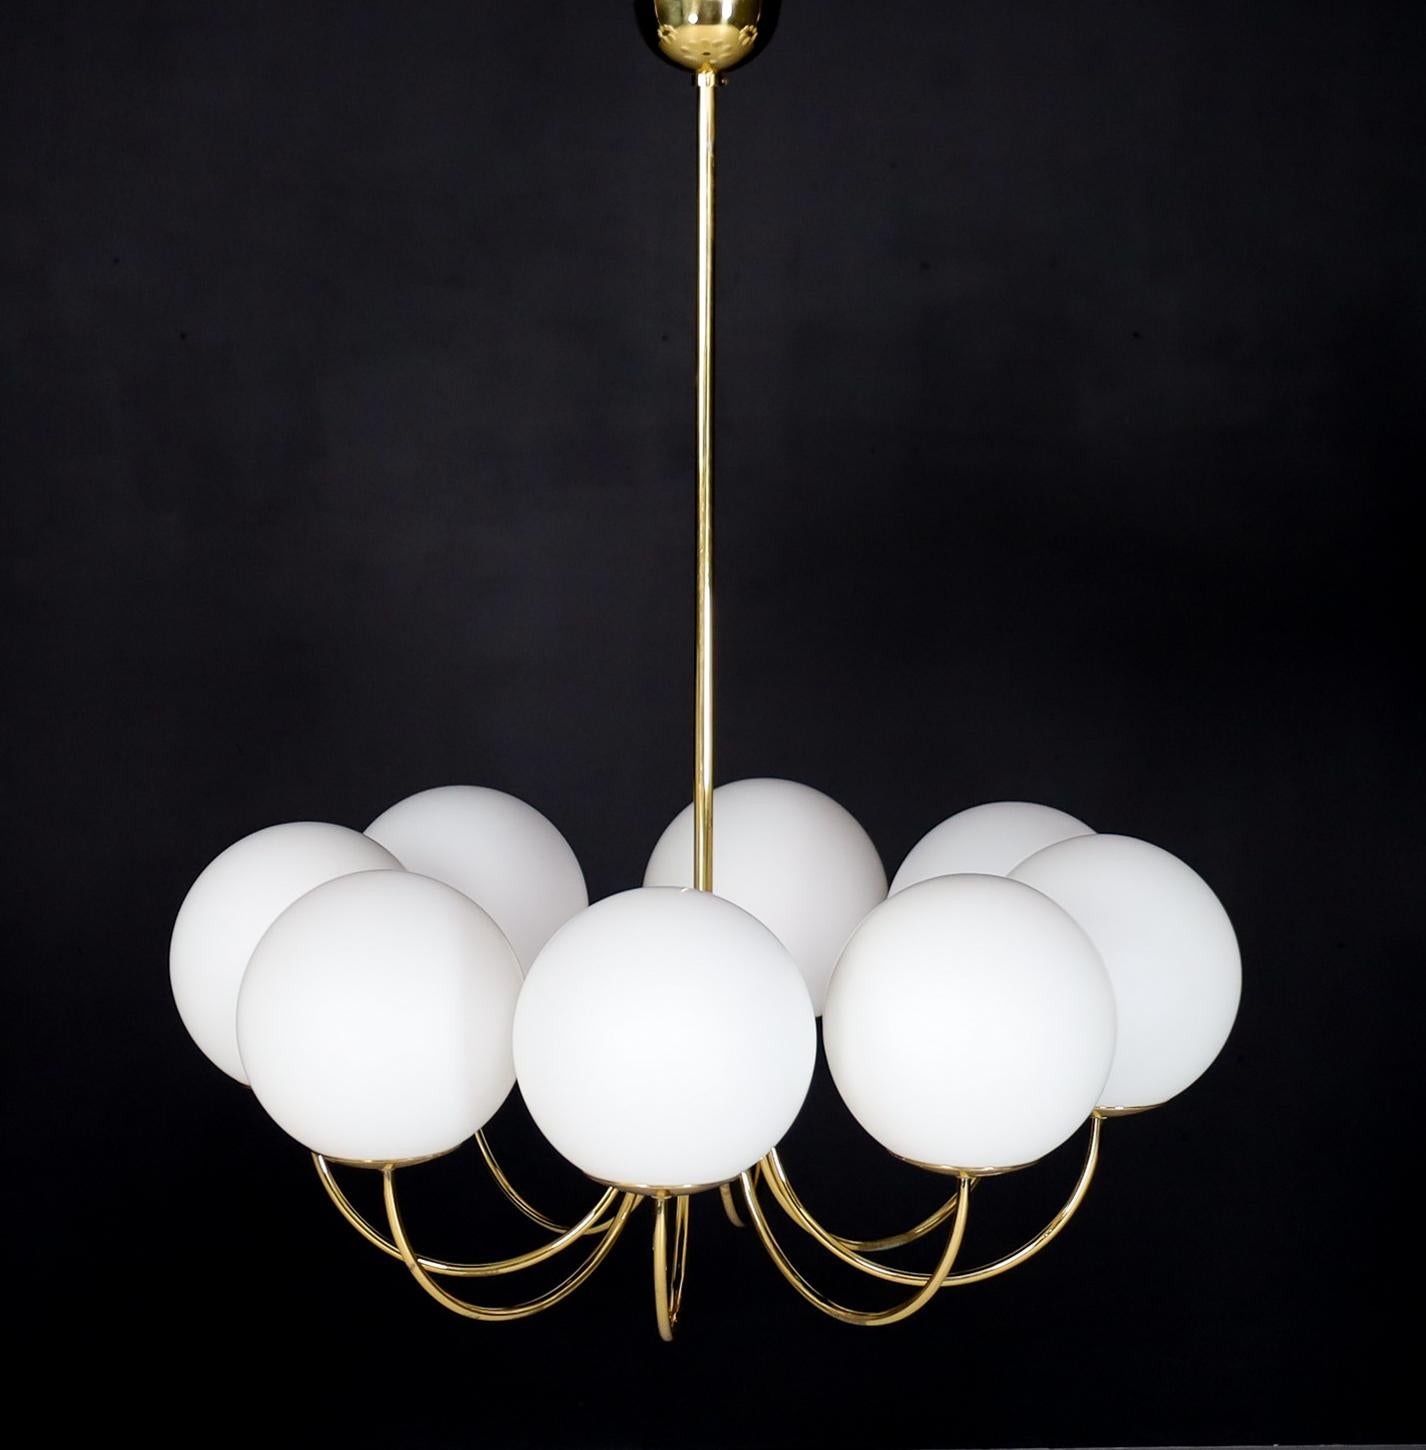 Mid-Century Modern 1 of 3 Elegant Chandeliers with Brass Fixture and Opaline Glass Globes, 1960s For Sale